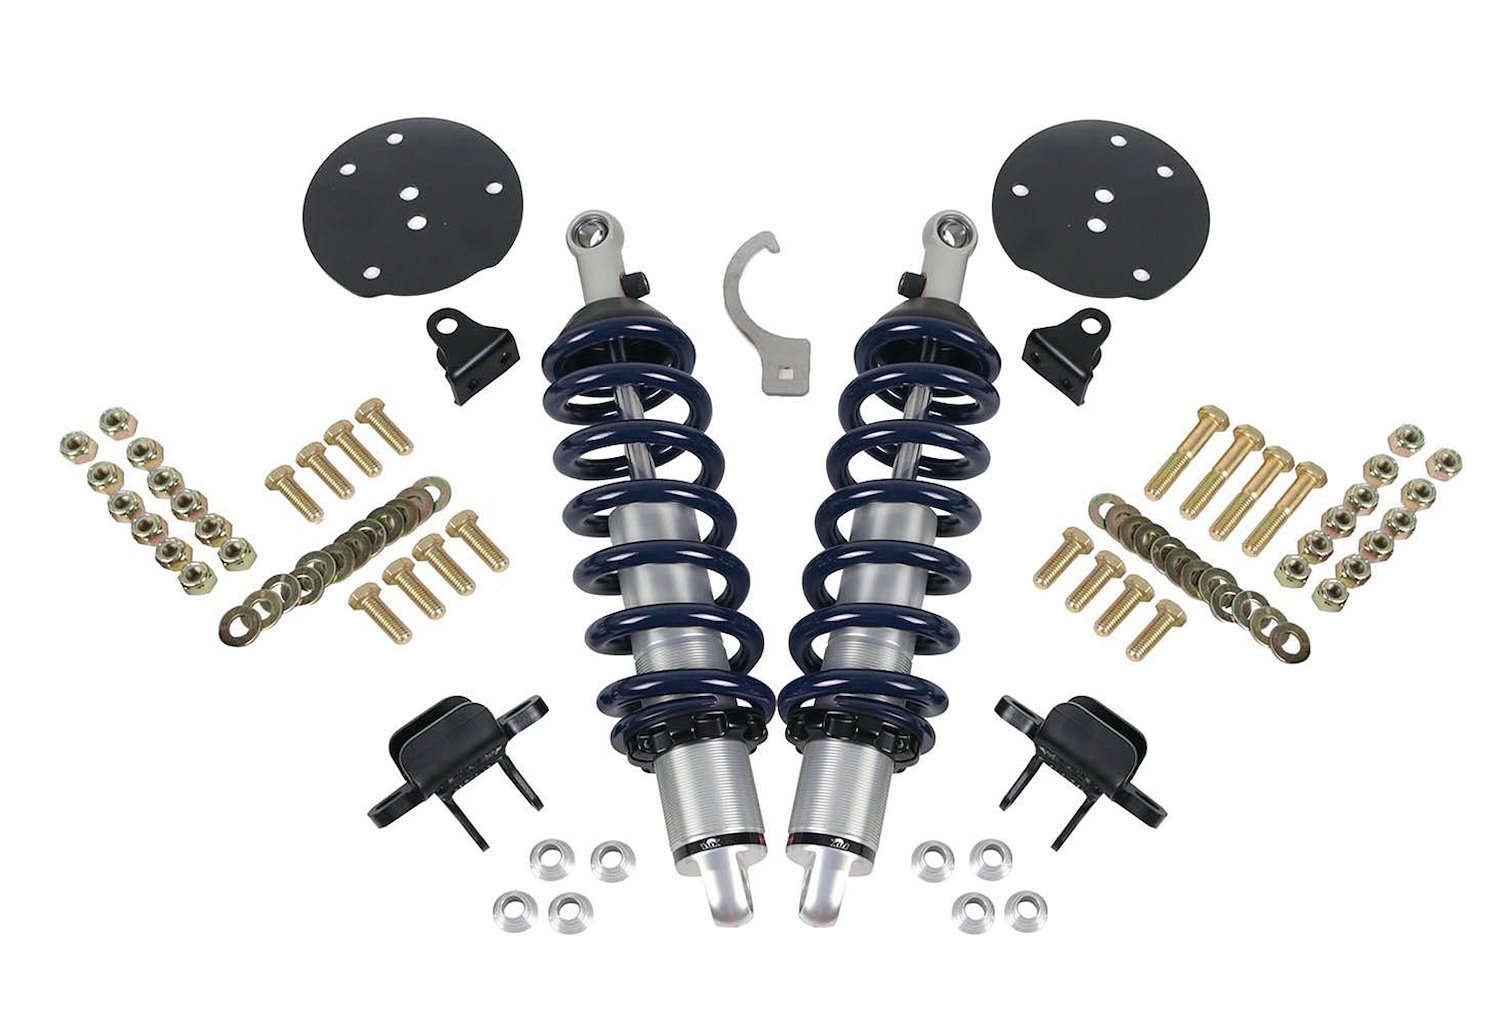 HQ Series Front Coil-Over Kit for Late-Model Ford F-150 2WD Trucks